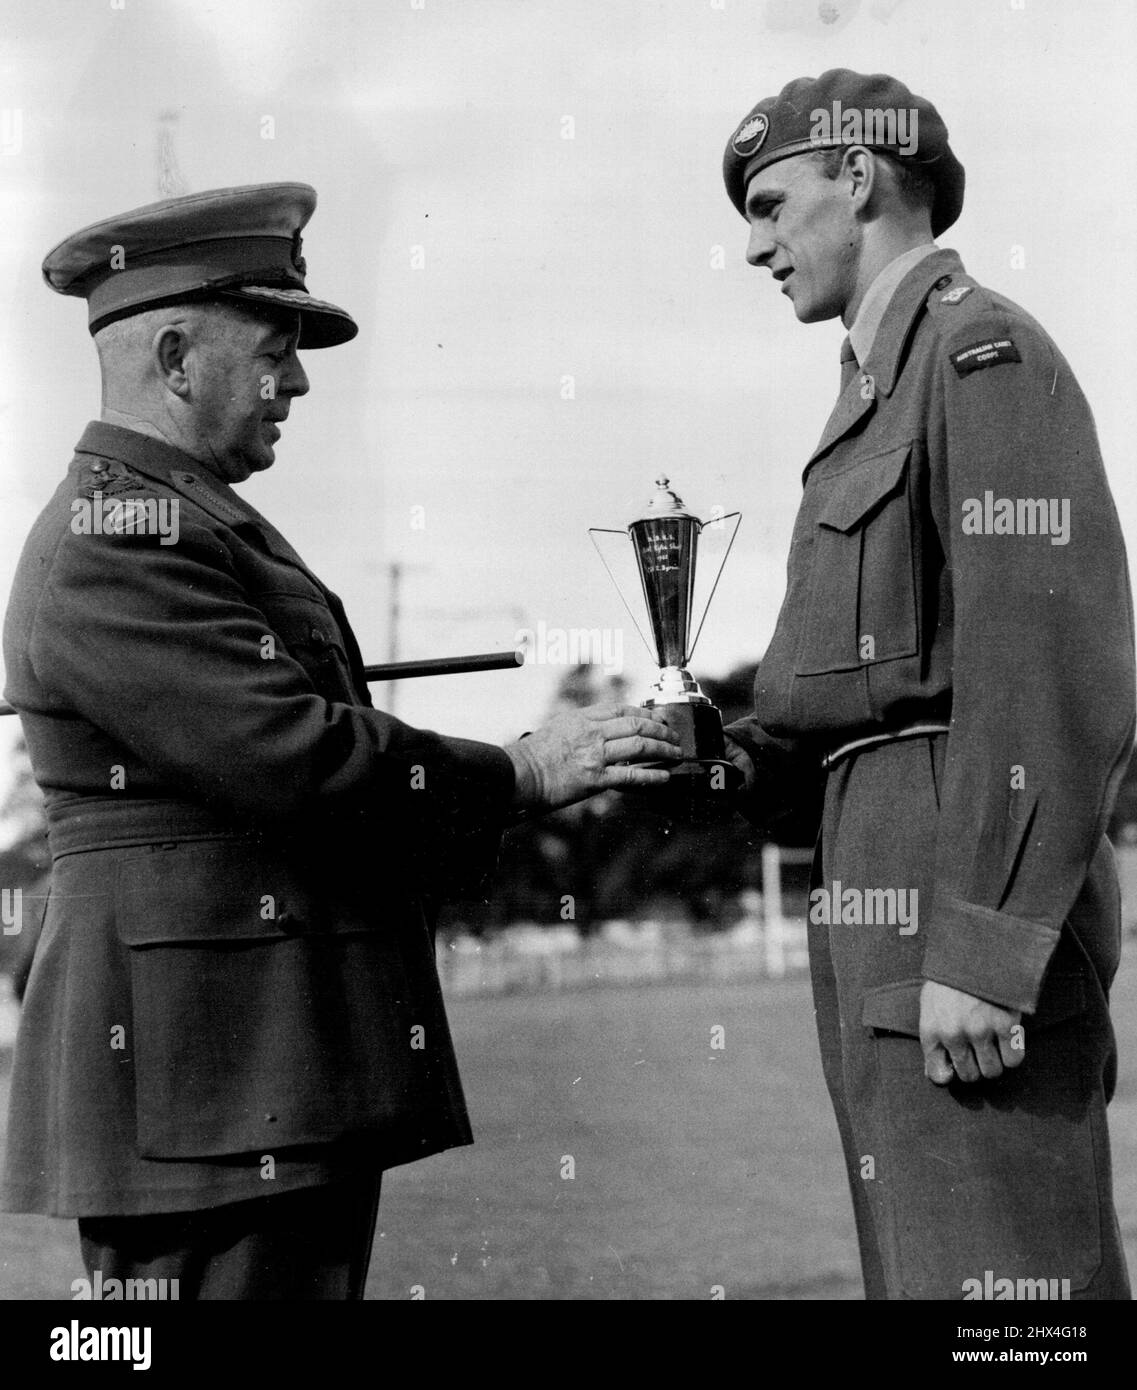 Ceremonial Parade of the Marist brothers high school Darlinghurst this shot shows the Brig F. Hinton. old boy of the school presenting his cup to the winner of the best shooting cadet in the school Corp. Cadet Lt. R. Byrne of Darlinghurst at the Rushcutter bay oval during the passing out parade. October 9, 1952. (Photo by Gordon Herbert Short/Fairfax Media). Stock Photo